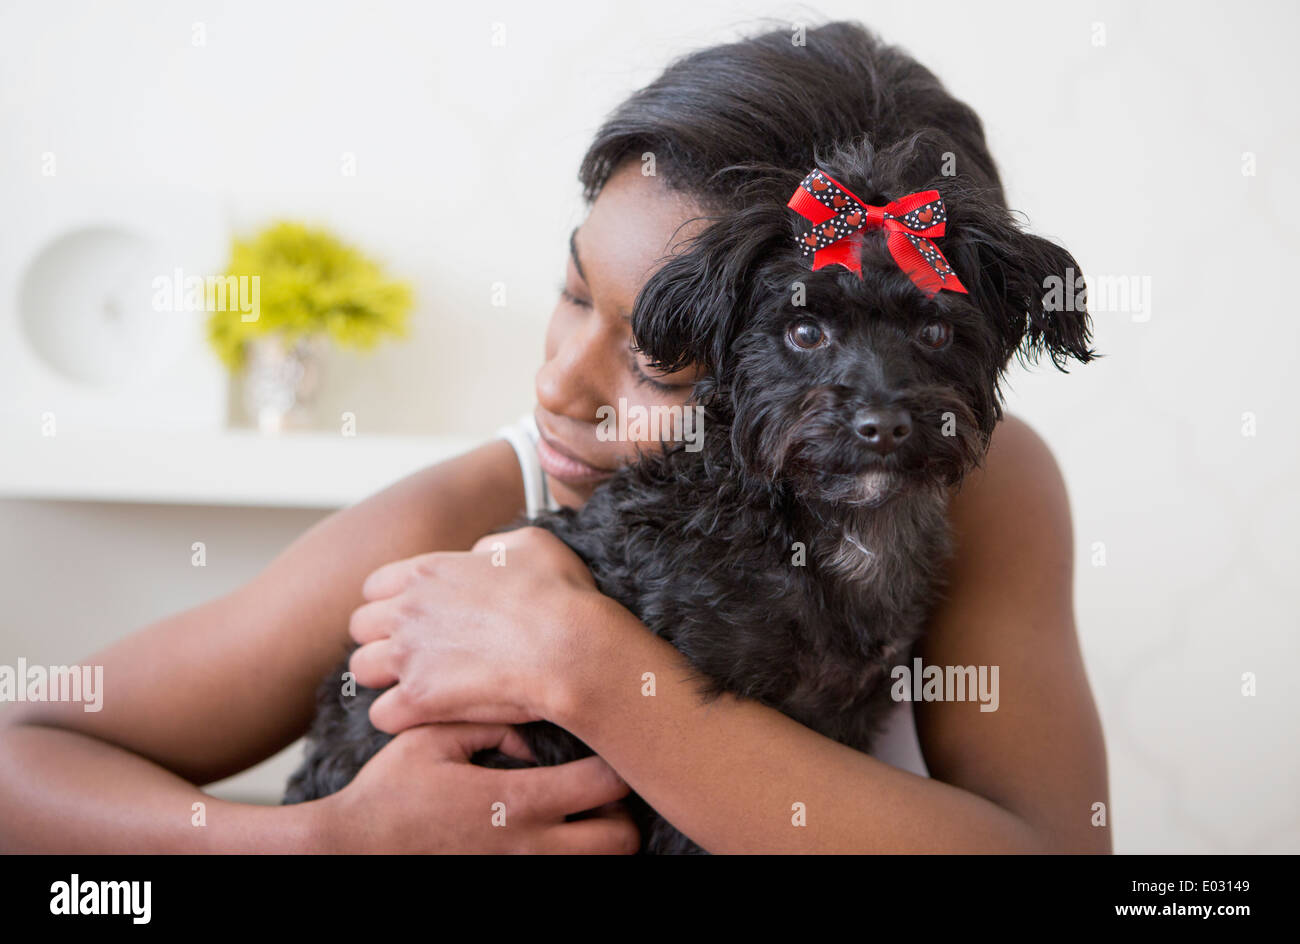 A young girl hugging her small black pet dog. Stock Photo